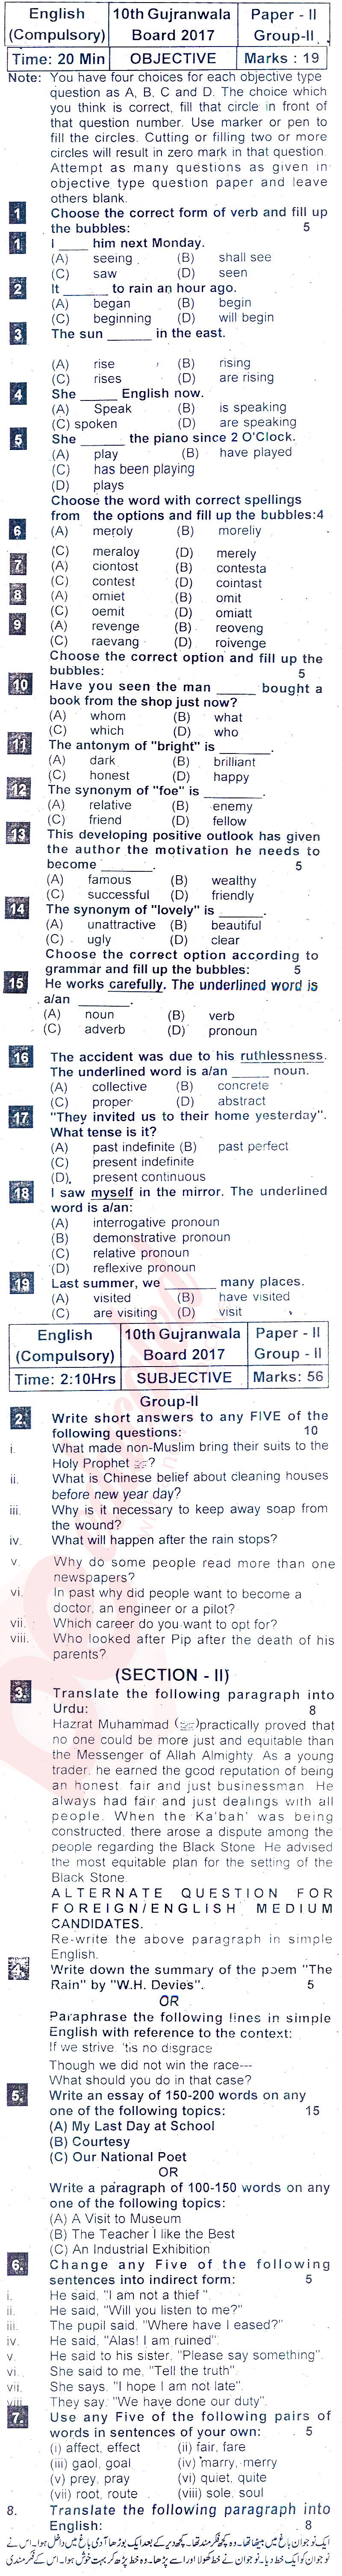 English 10th class Past Paper Group 2 BISE Gujranwala 2017